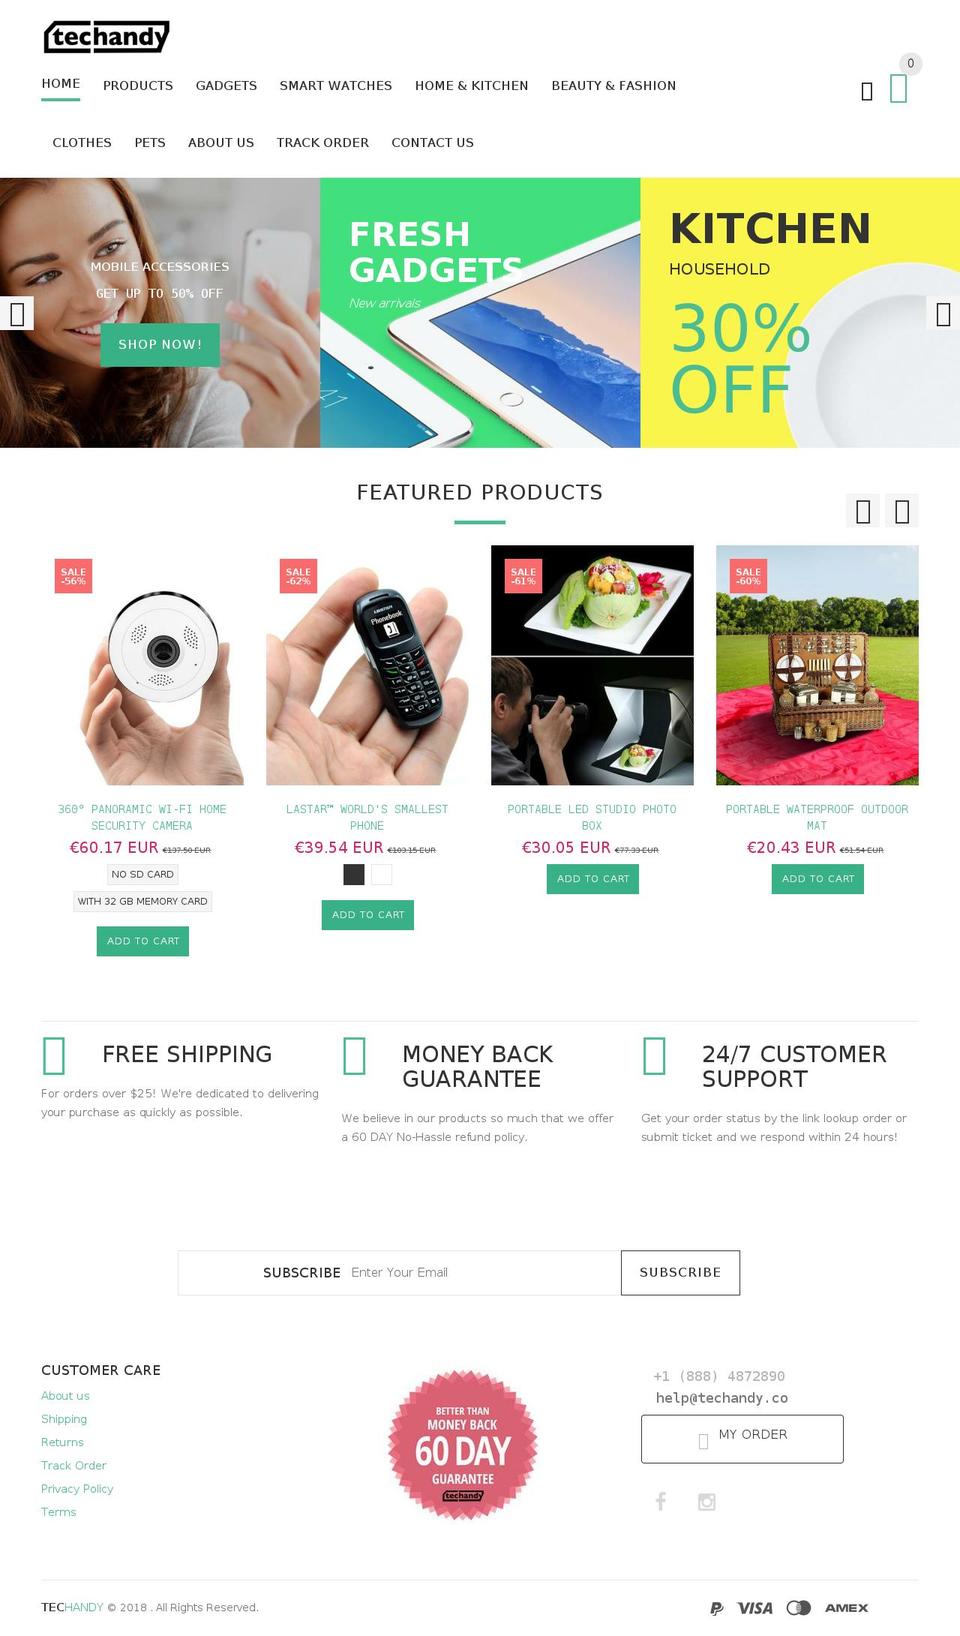 yourstore-v1-4-8 Shopify theme site example techandy.co